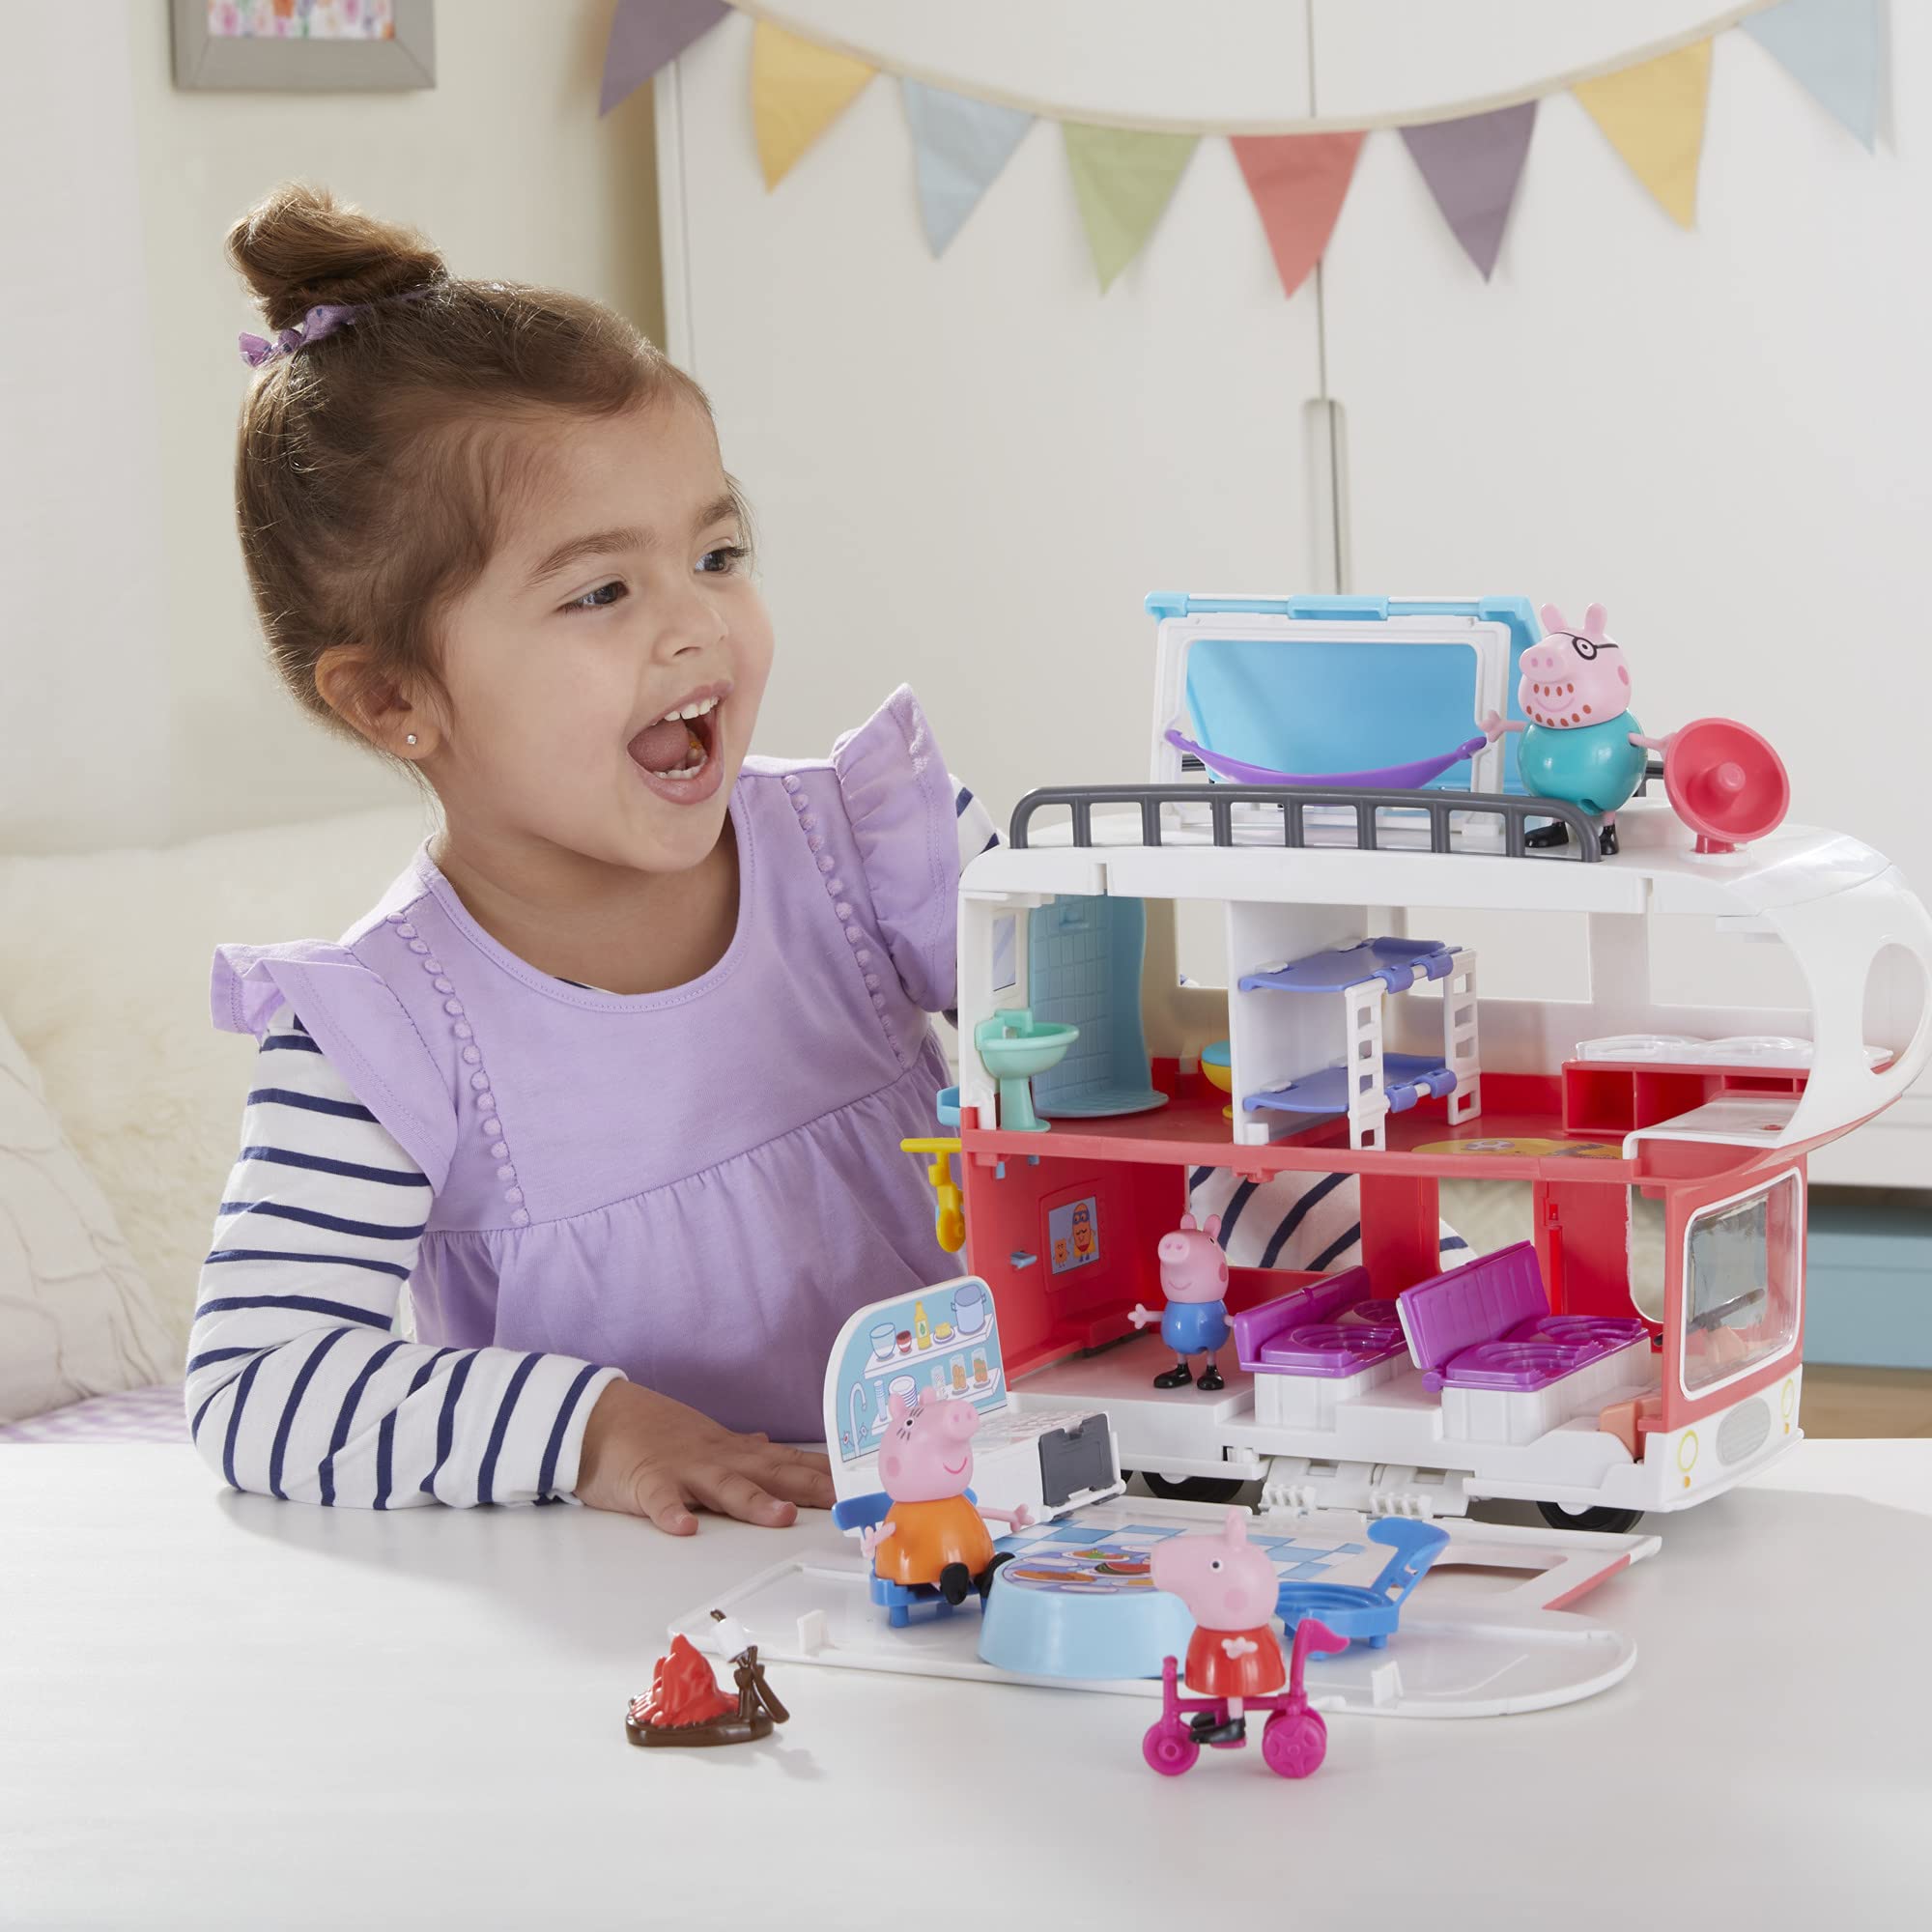 Peppa Pig Peppa’s Adventures Peppa’s Family Motorhome Preschool Toy, Vehicle to RV Playset, Plays Sounds and Music, Ages 3 and up